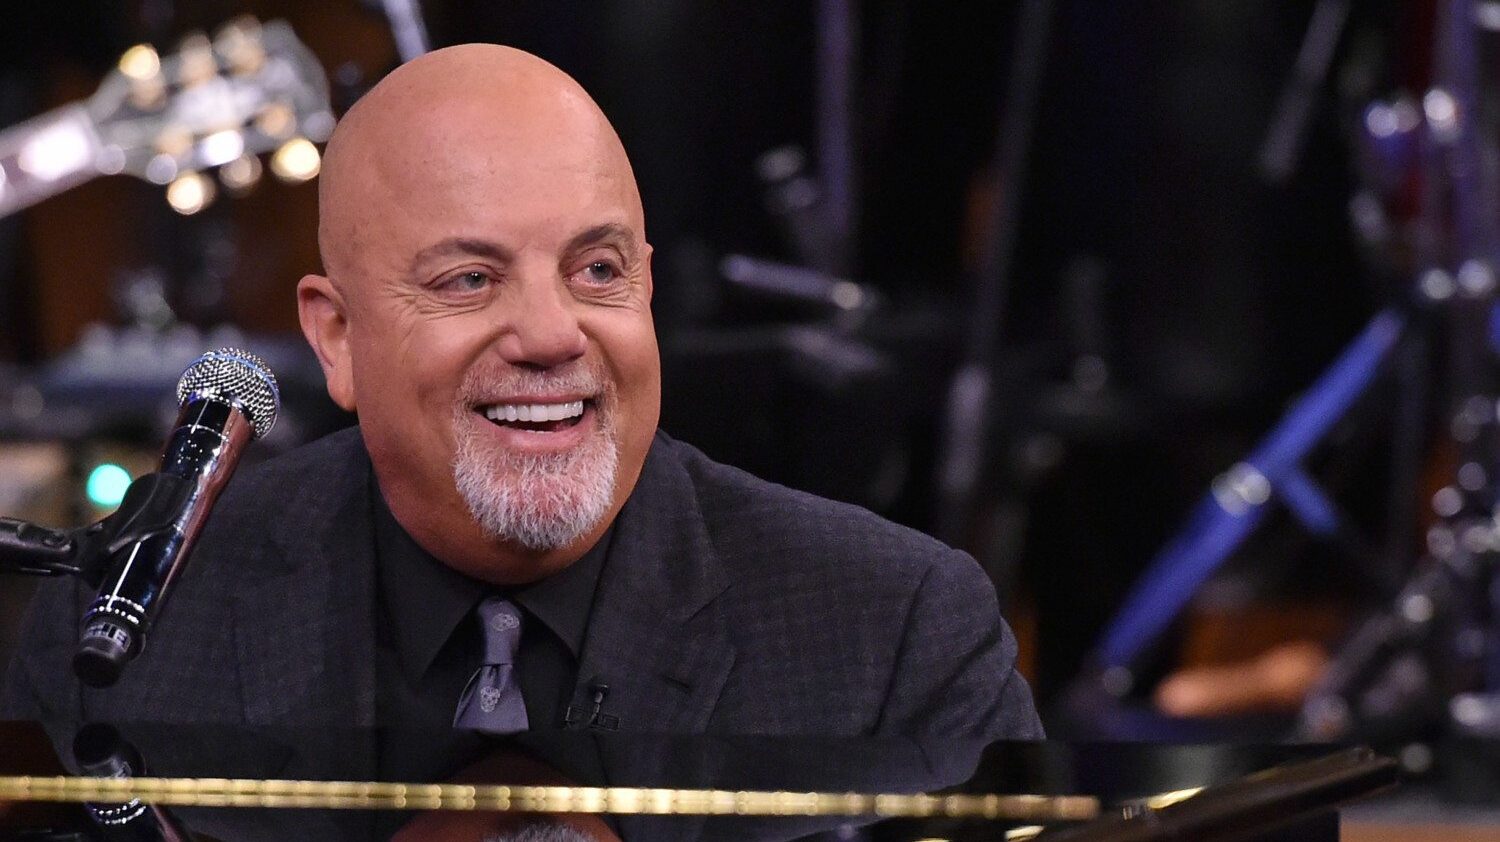 How to watch Billy Joel’s Madison Square Garden concert for free